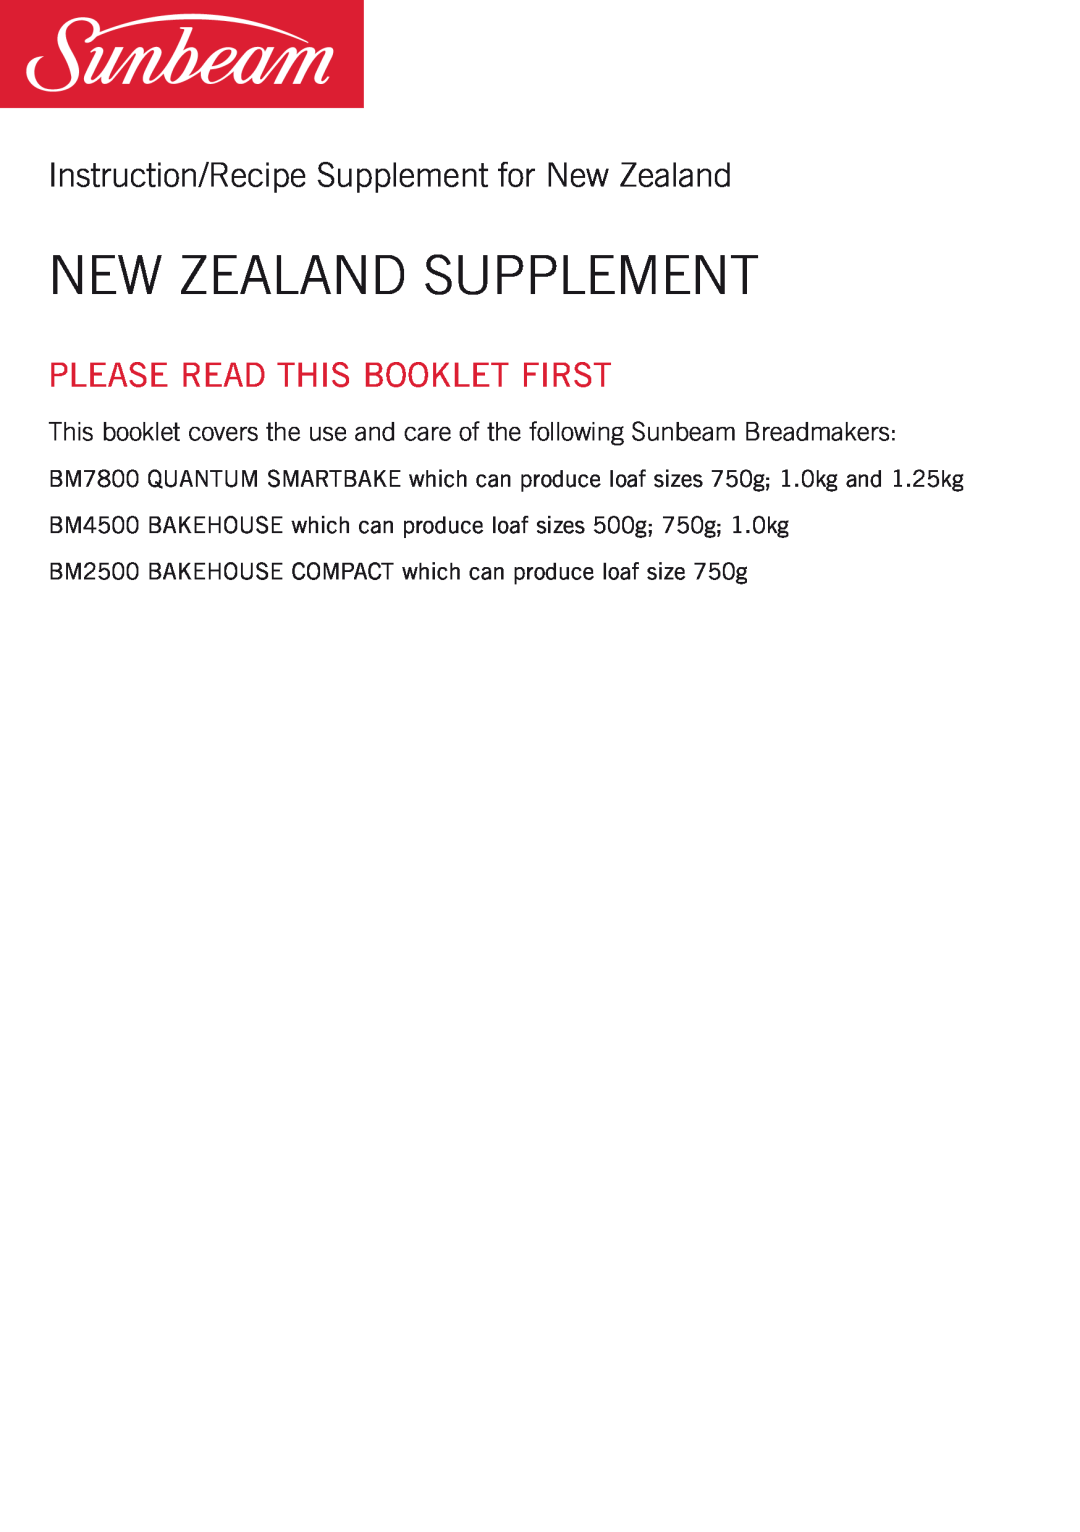 Sunbeam BM4500 manual Instruction/Recipe Supplement for New Zealand, New Zealand Supplement, Please Read This Booklet First 